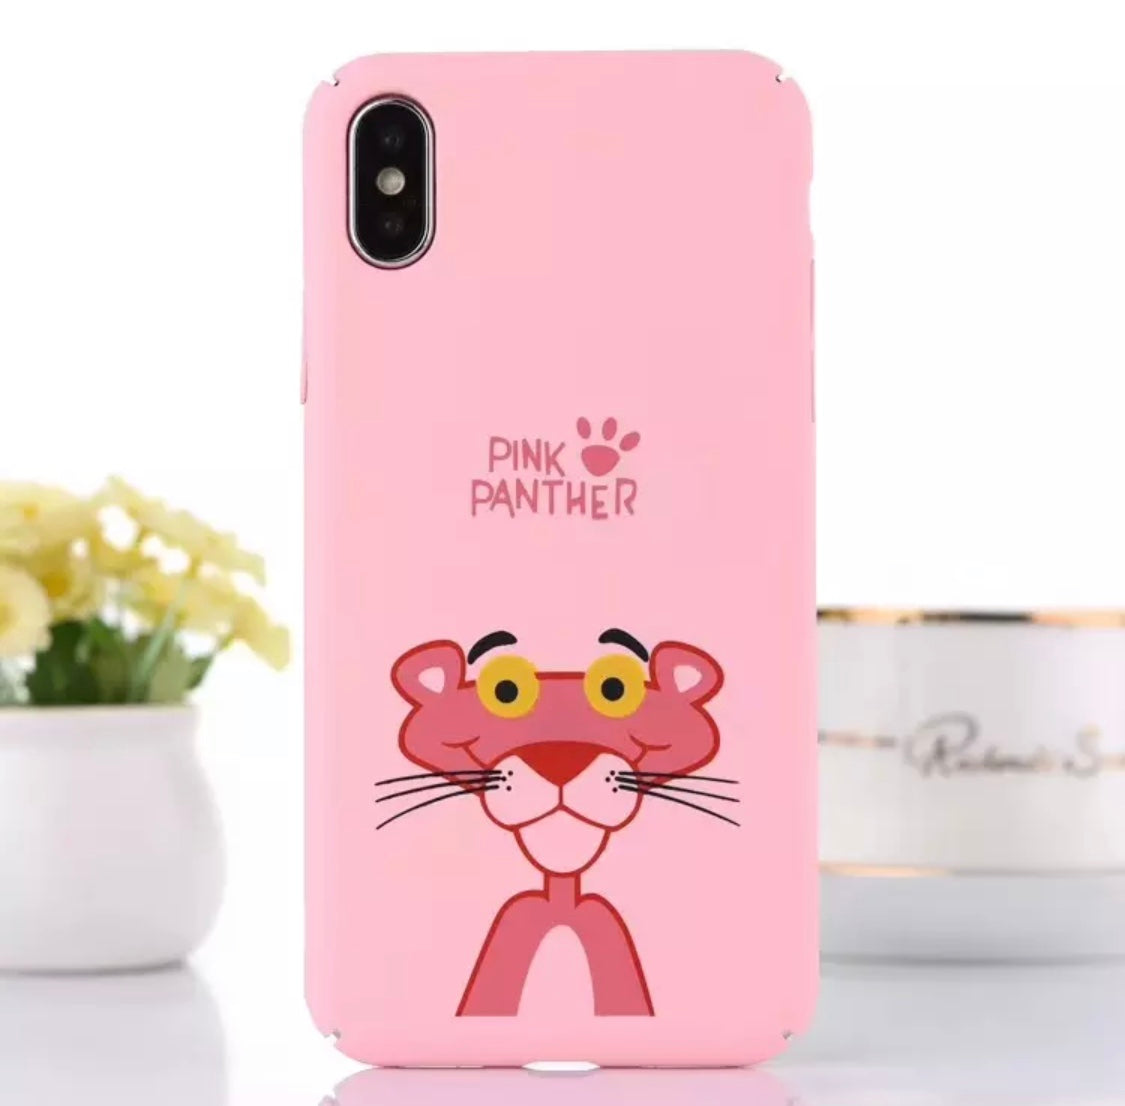 DDLGVERSE Pink Panther iPhone Case Pink